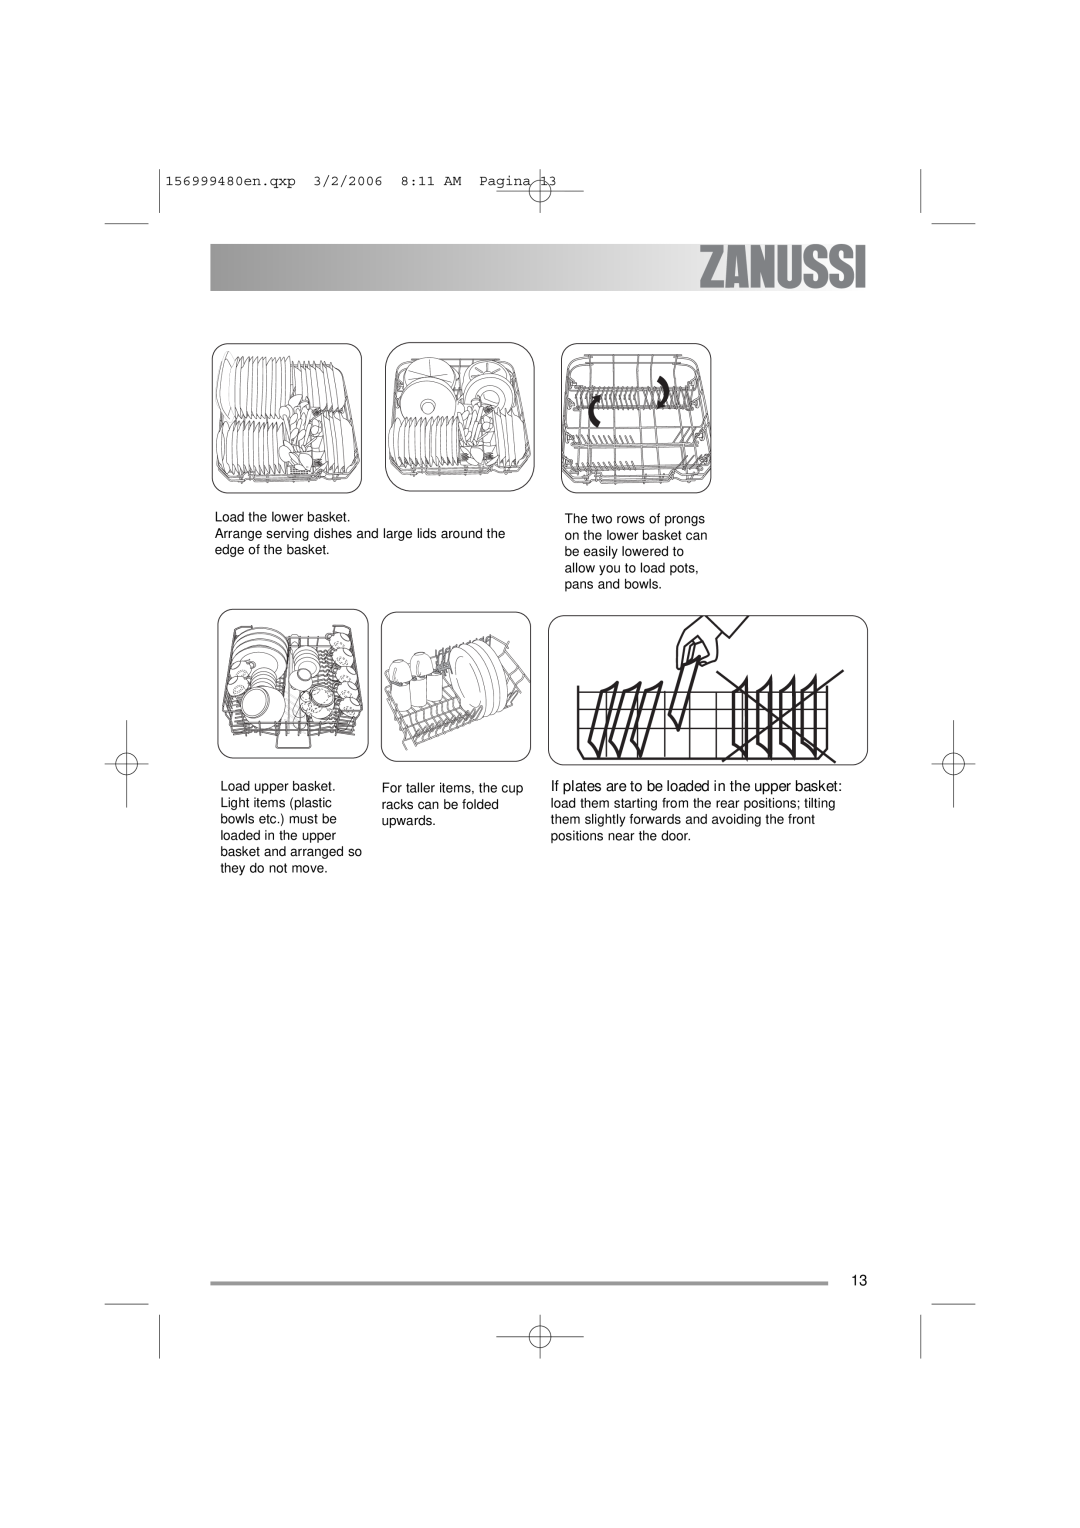 Zanussi ZDF311 user manual Load the lower basket, Arrange serving dishes and large lids around the edge of the basket 